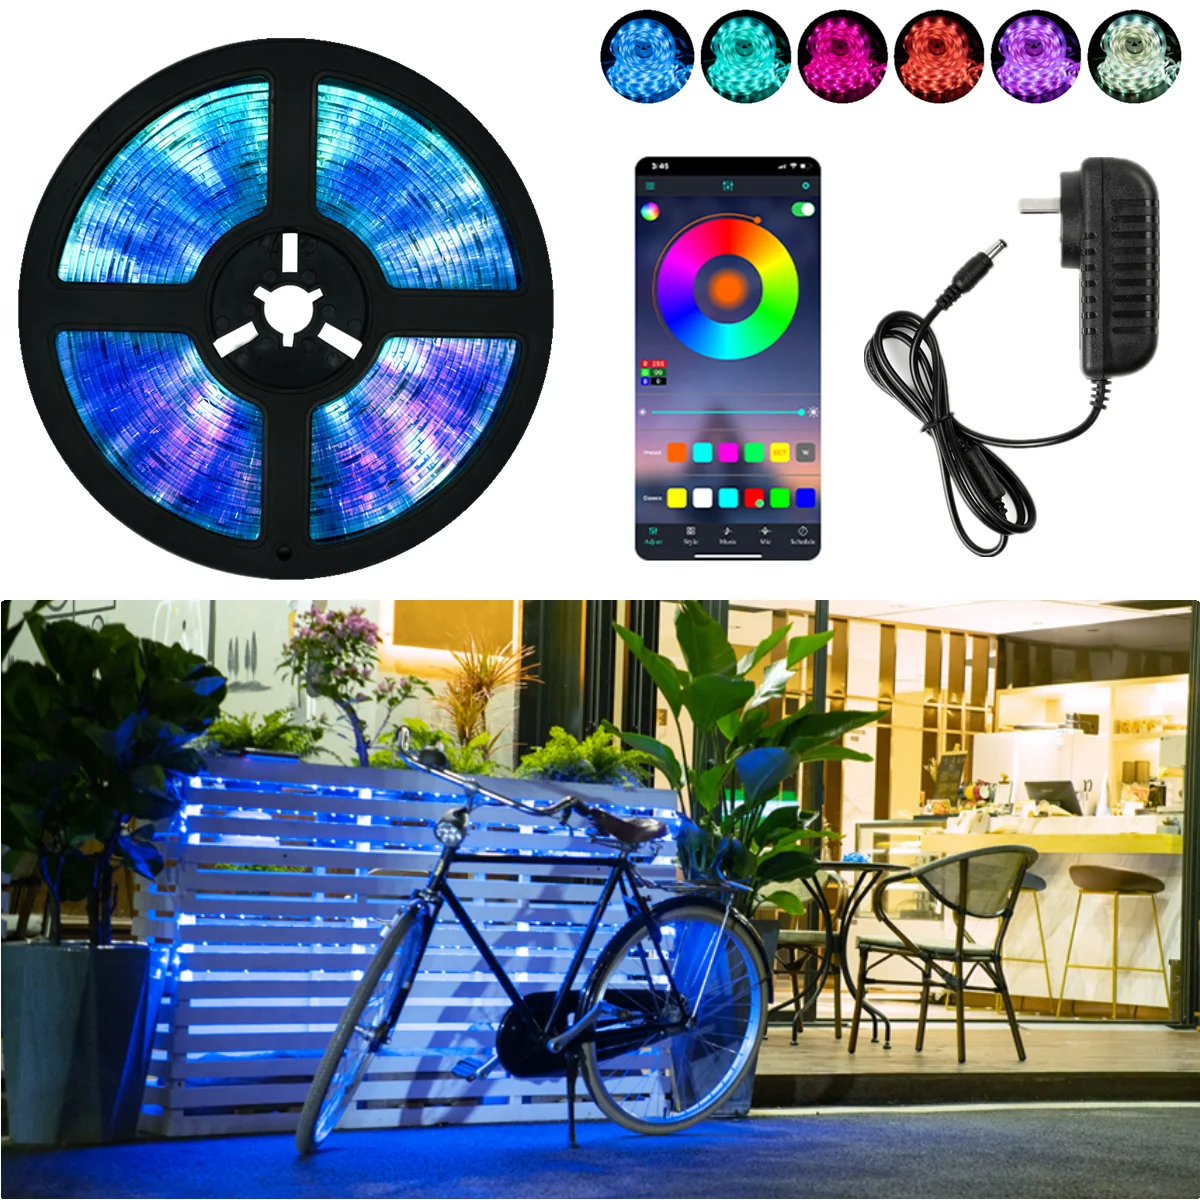 

LED Strip Lights Waterproof Lamp RGB 5050 SMD 2835 WIFI Flexible Tape Diode luces led 5M 10M 15M 20M DC12V For Room Decor